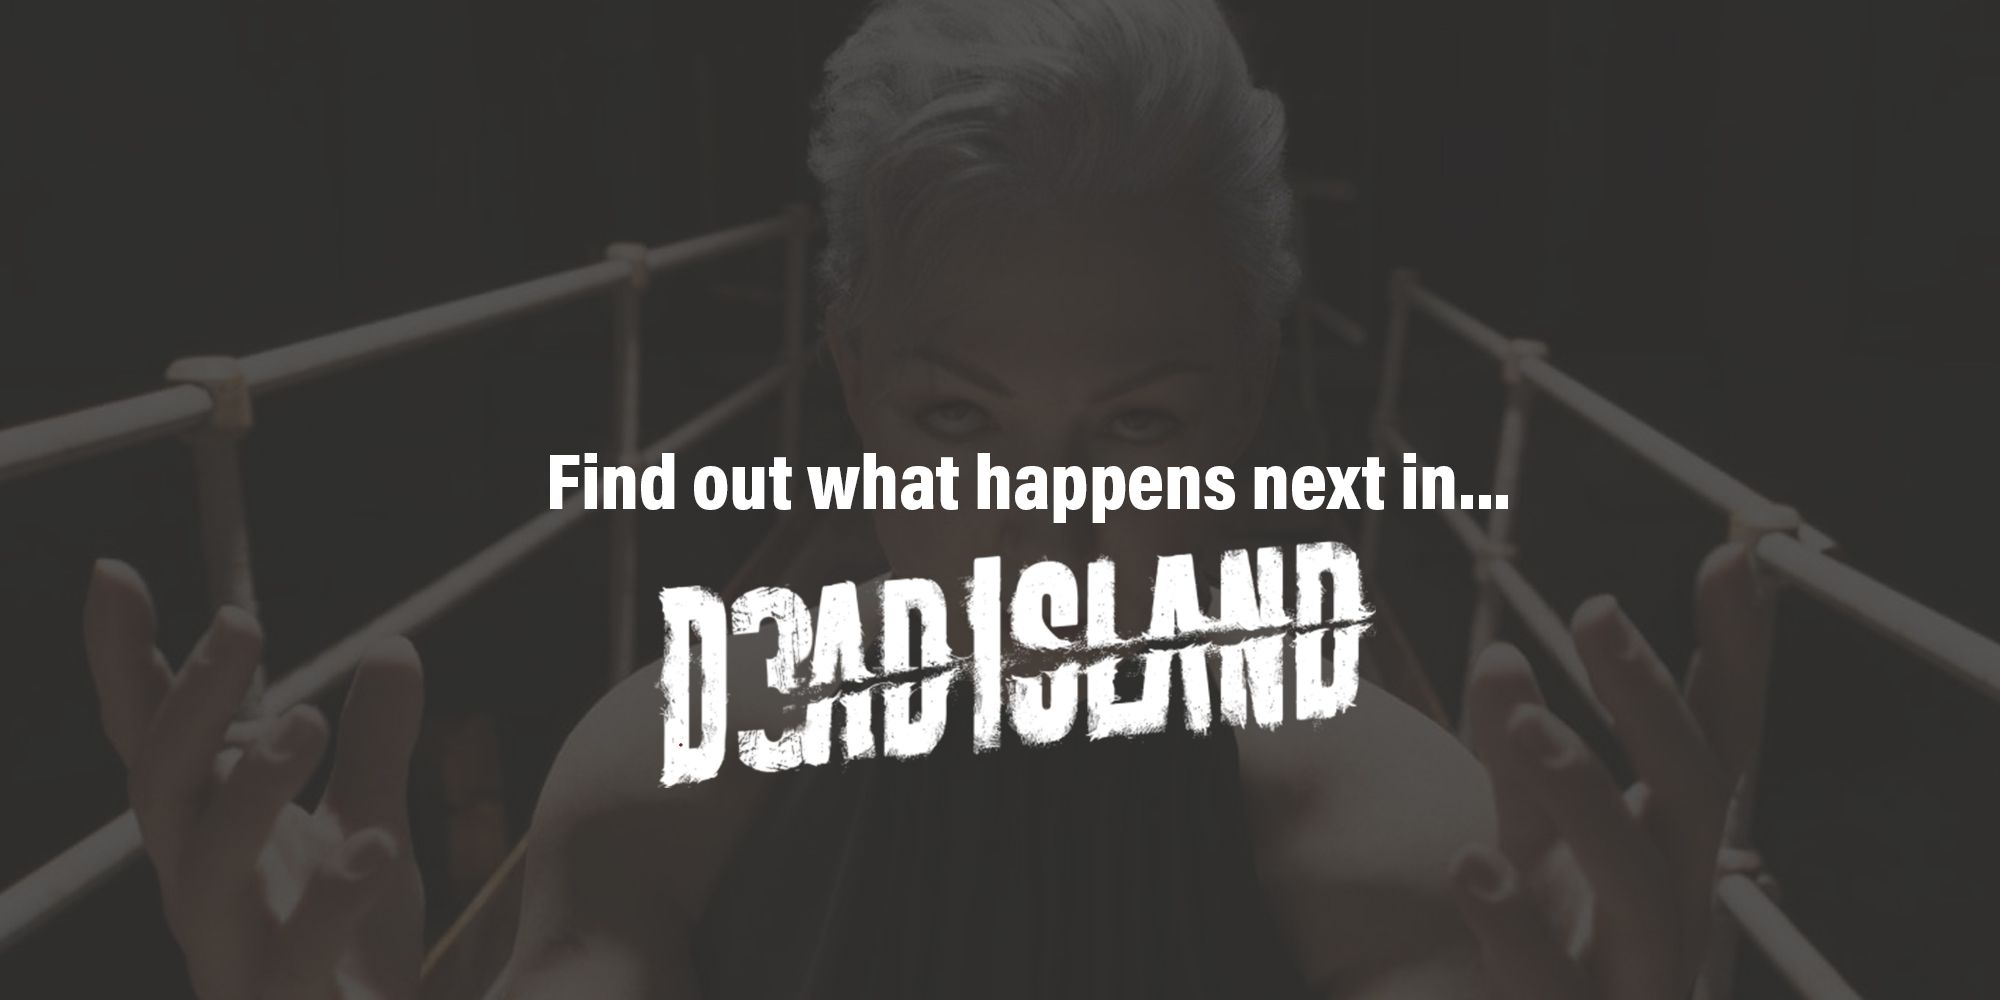 find out what happens next in d3ad island